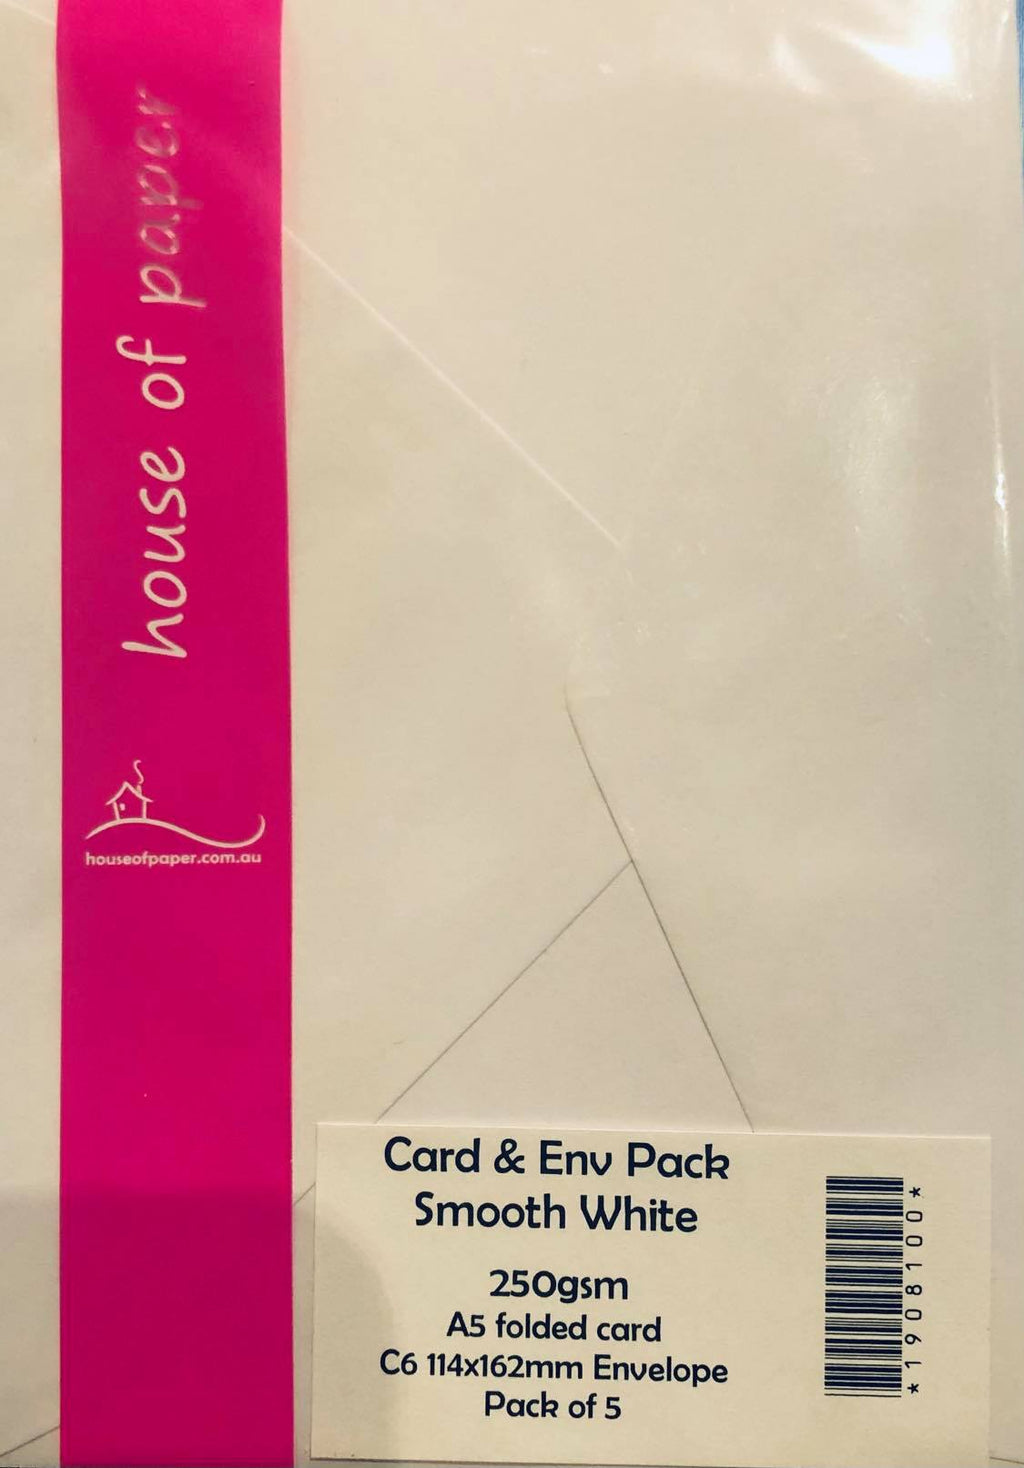 Card & Envelope Pack - Smooth White A5